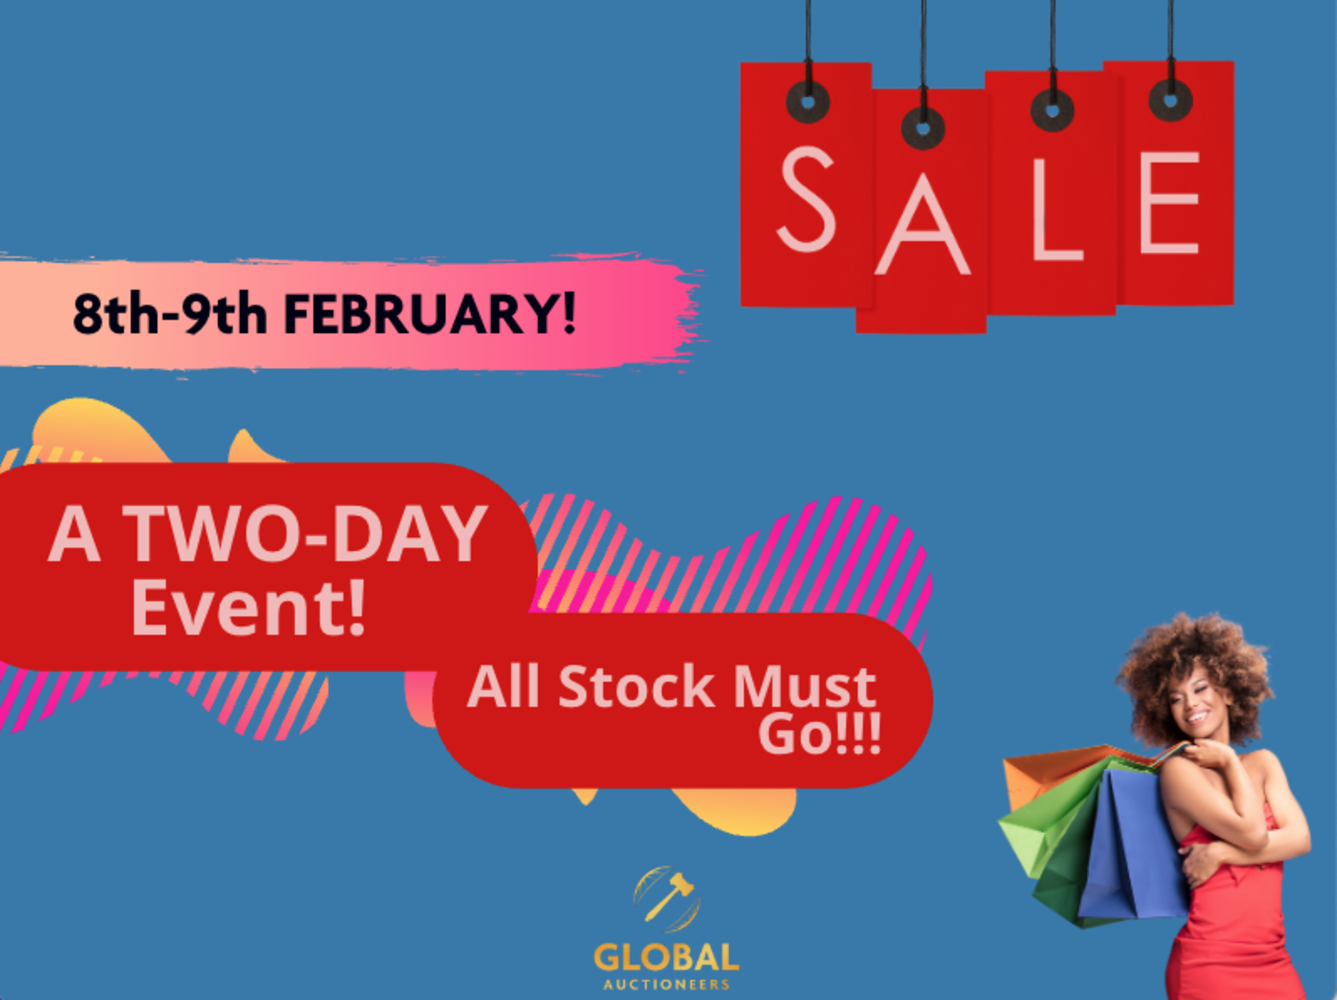 8th-9th February- Two day Buy it now NEW item event!!!